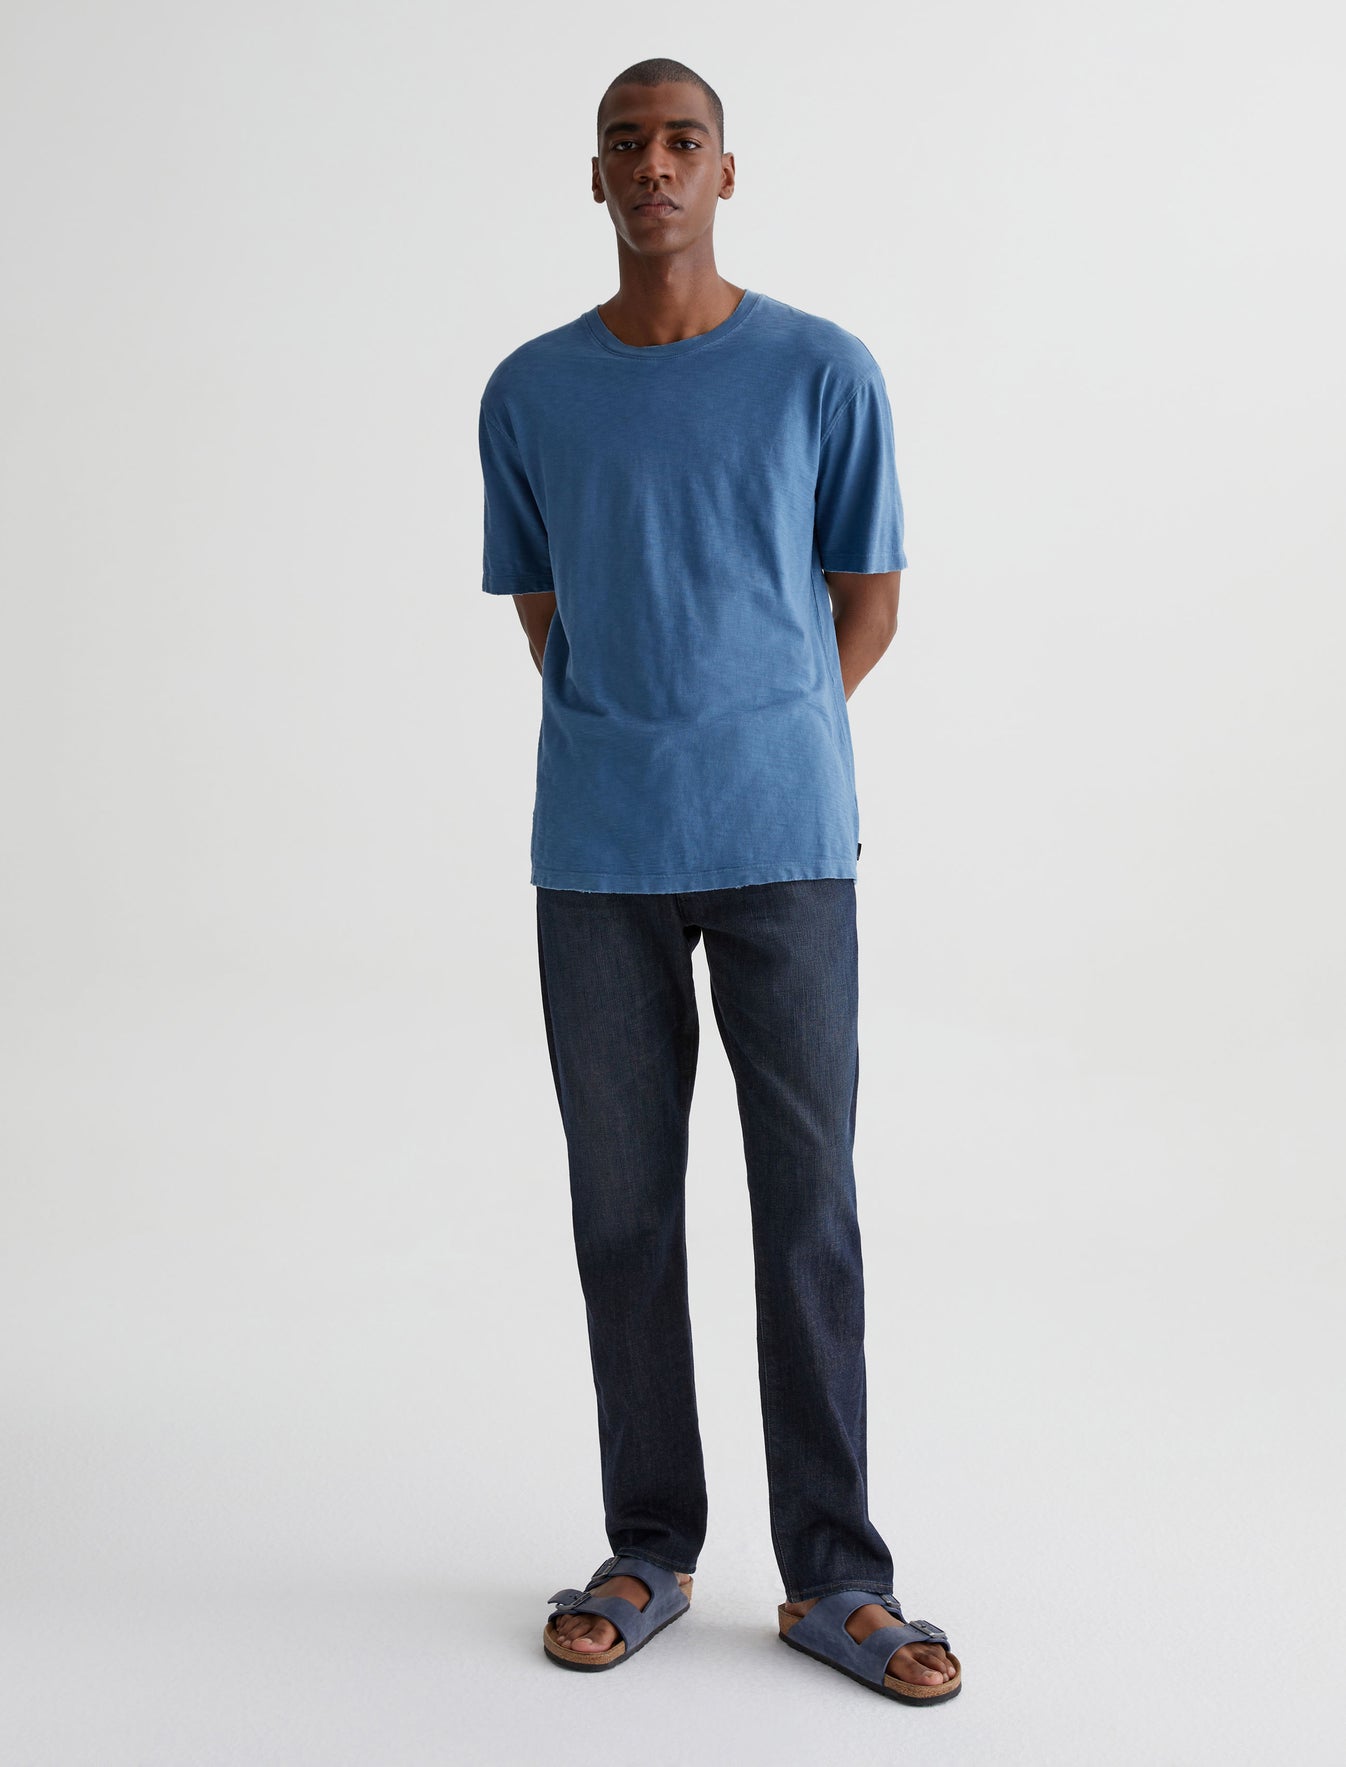 Wesley Crew|AG-ed Relaxed T-Shirt